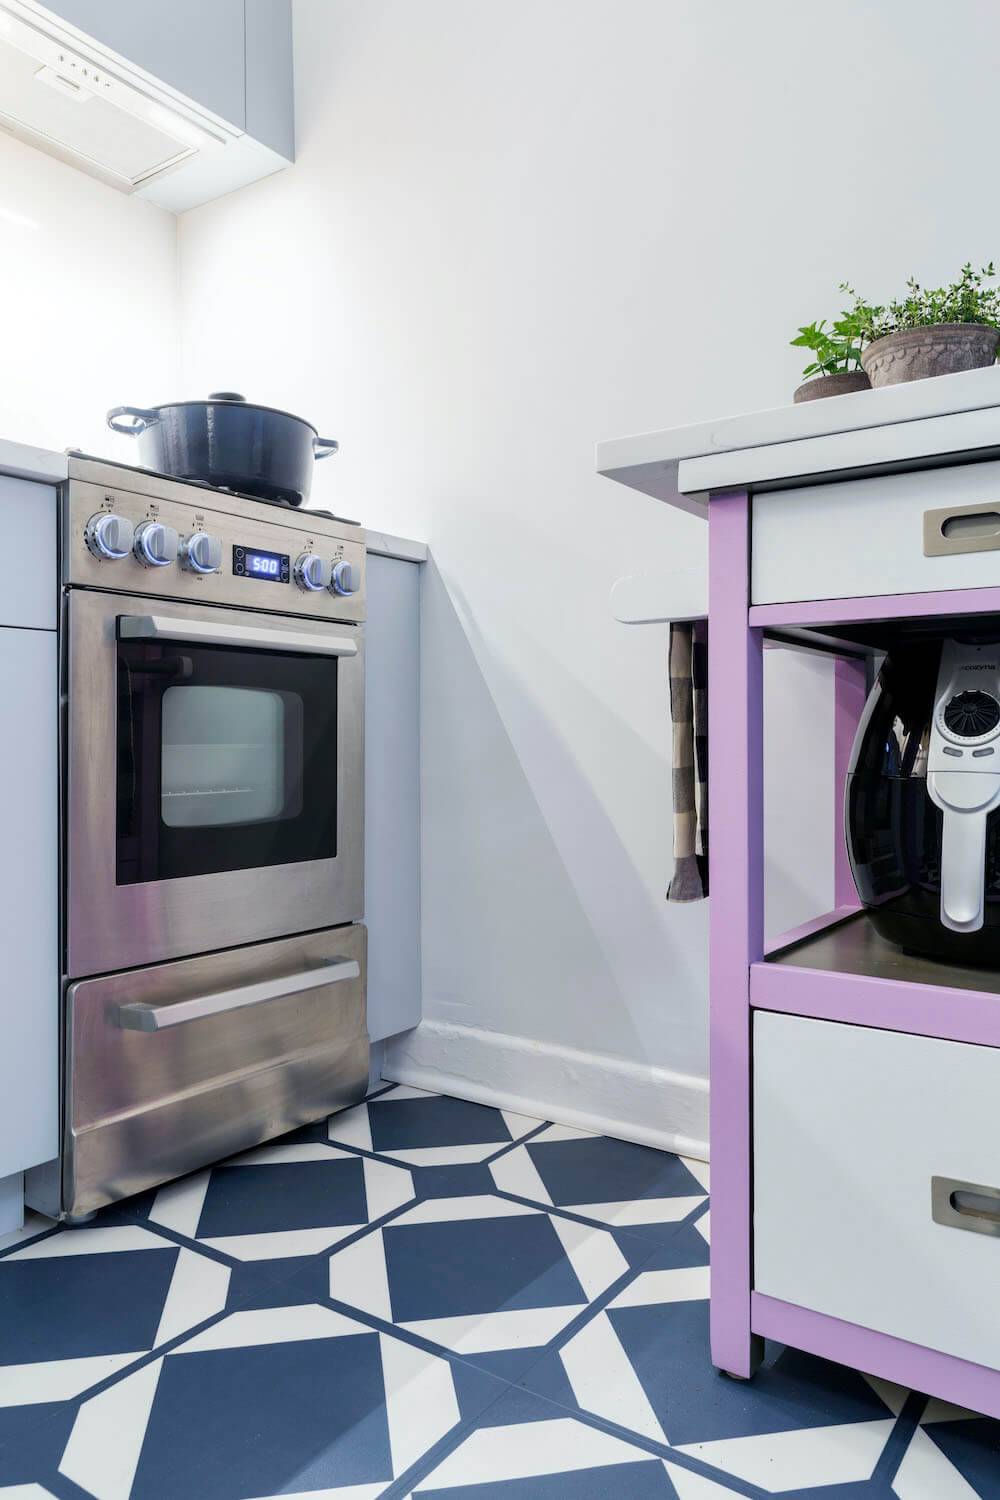 Image of a renovated kitchen with small stove and pattern floor tile